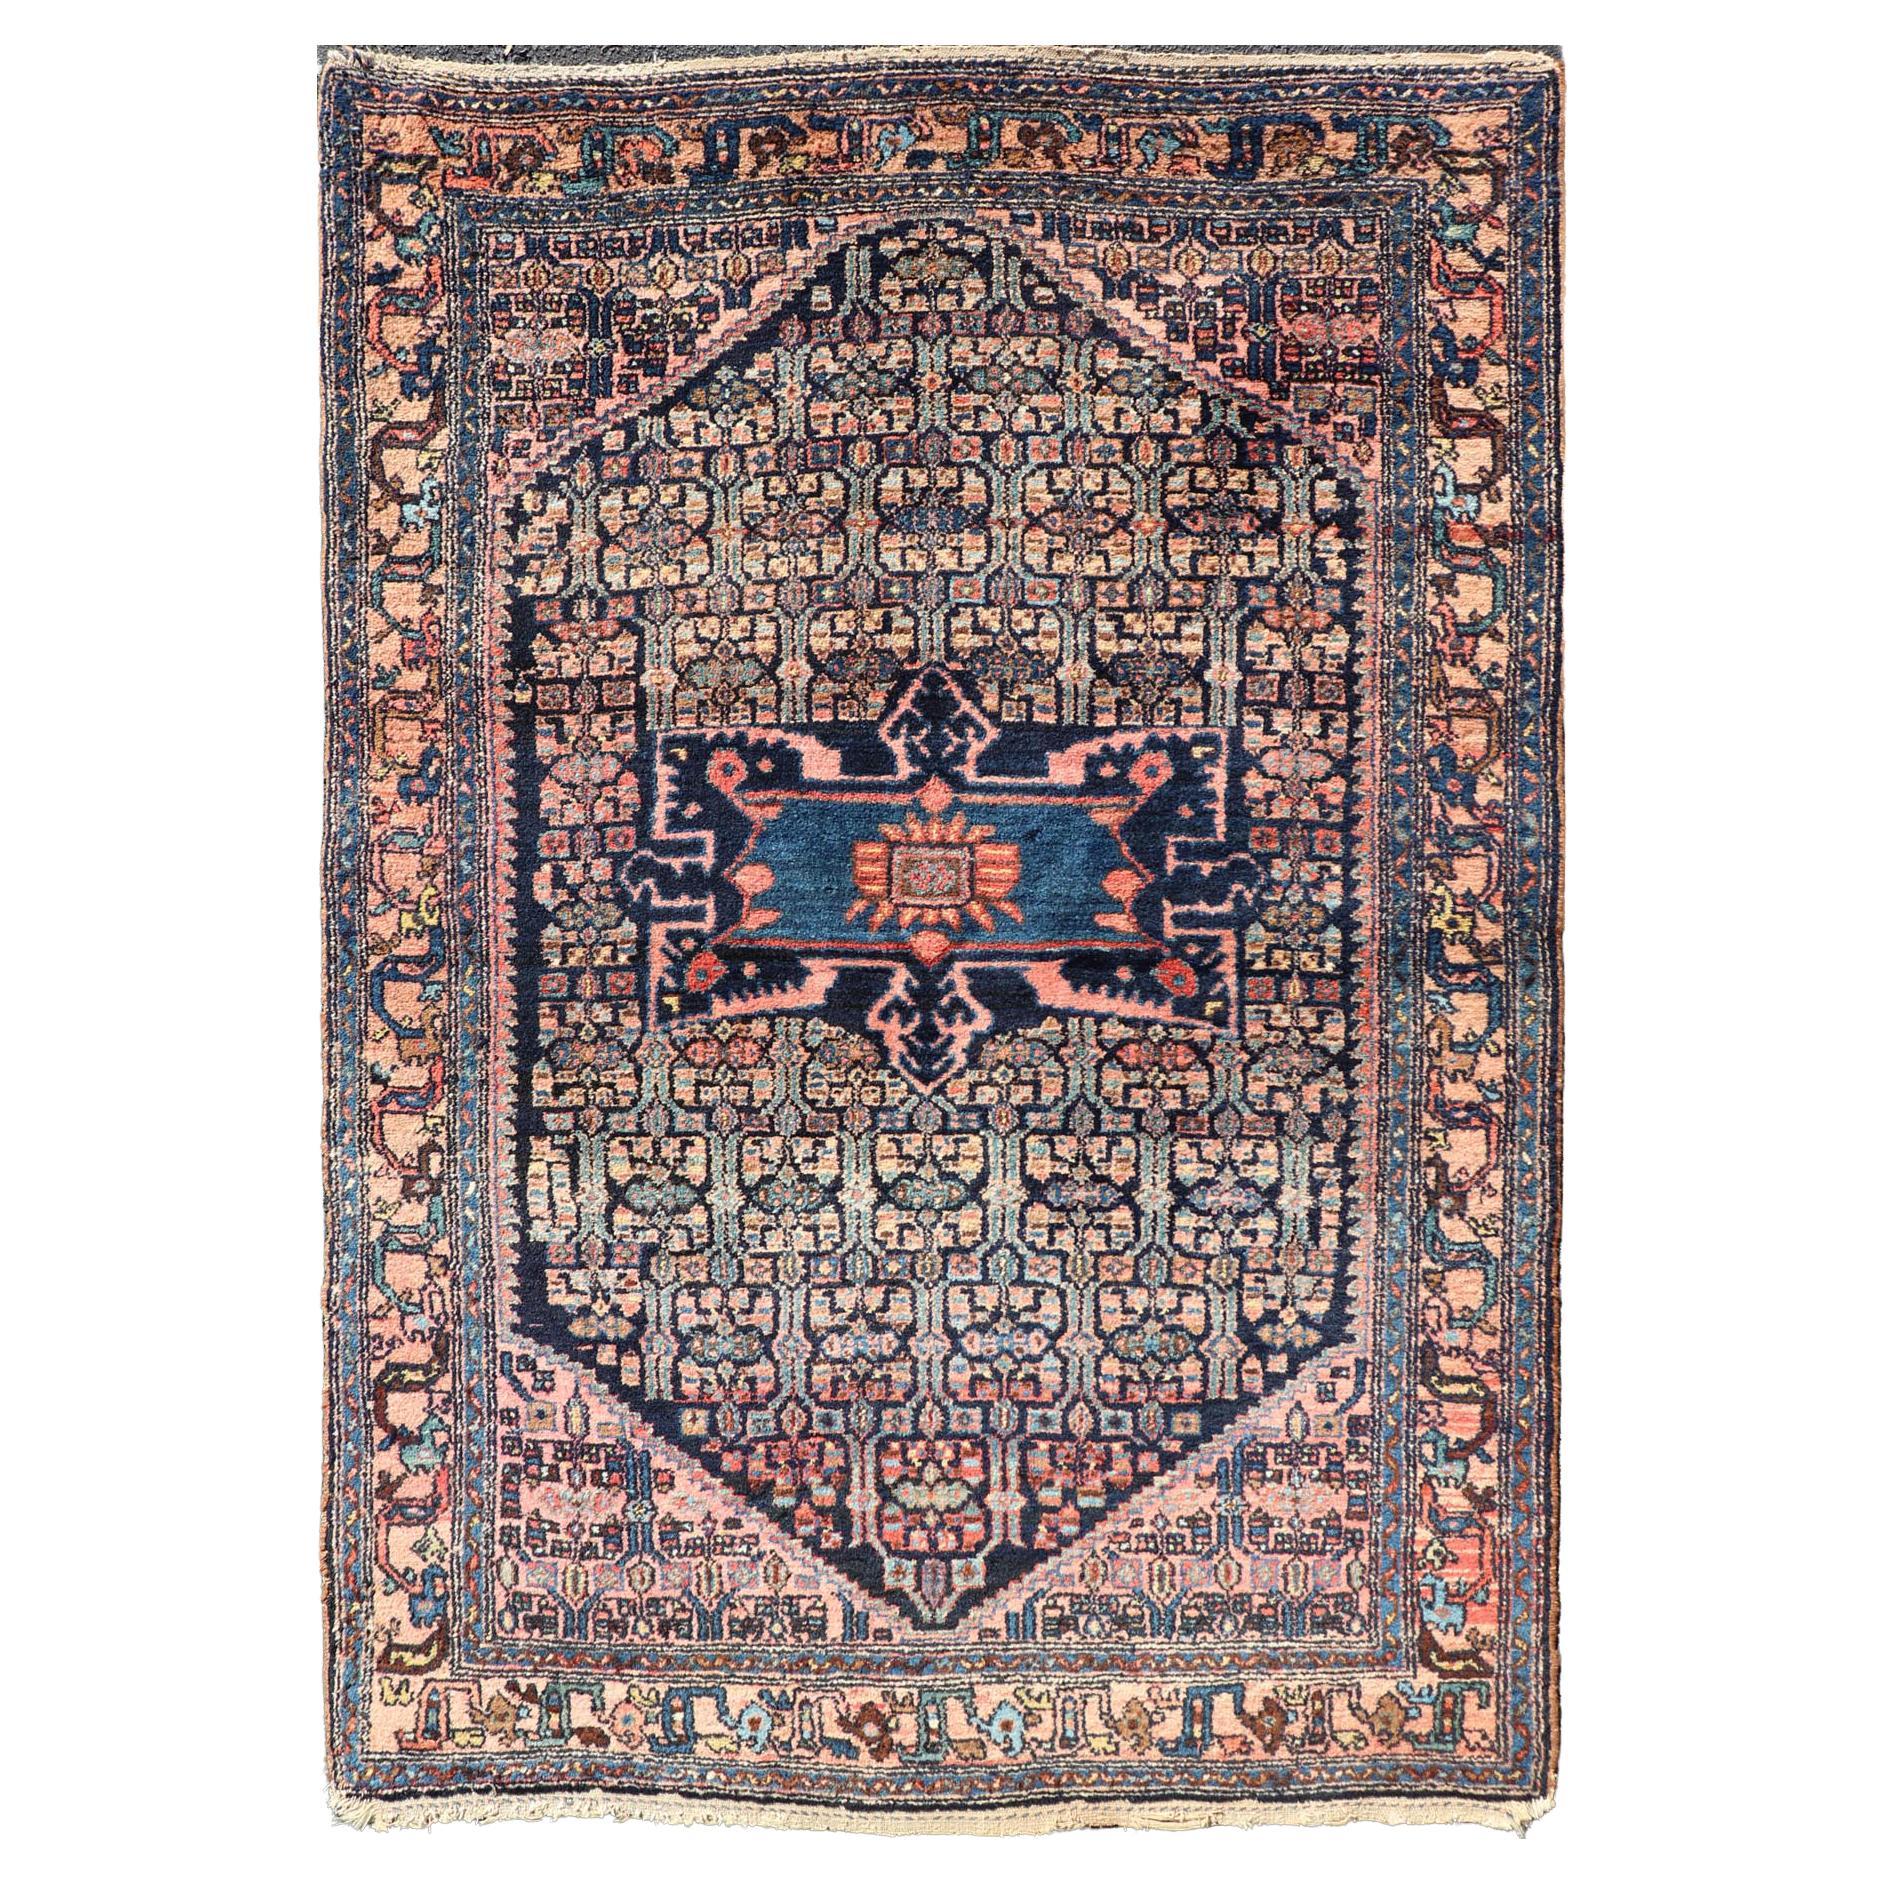 Antique Bibiakabad Rug with Layered Medallion and Geometric Design in Background